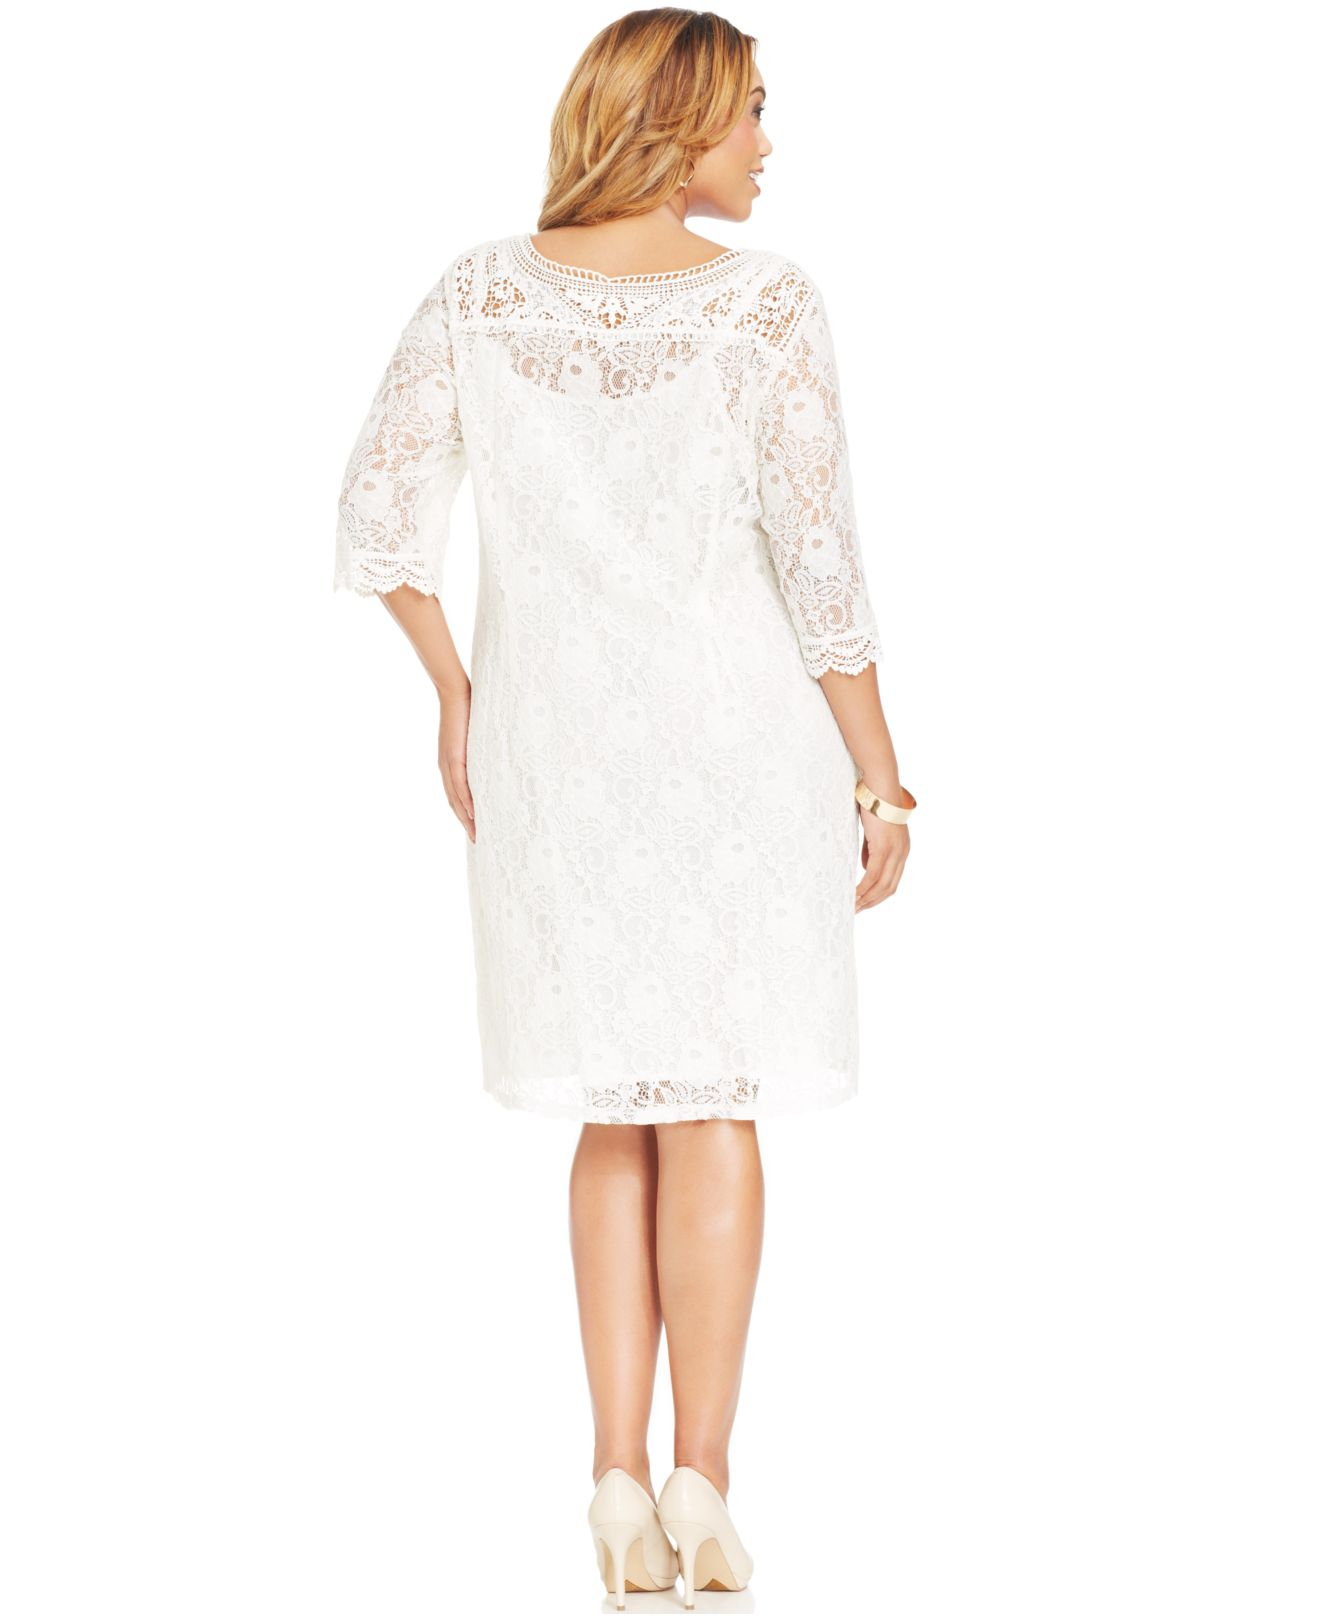 Lyst - Spense Plus Size Three-Quarter-Sleeve Lace Dress in White